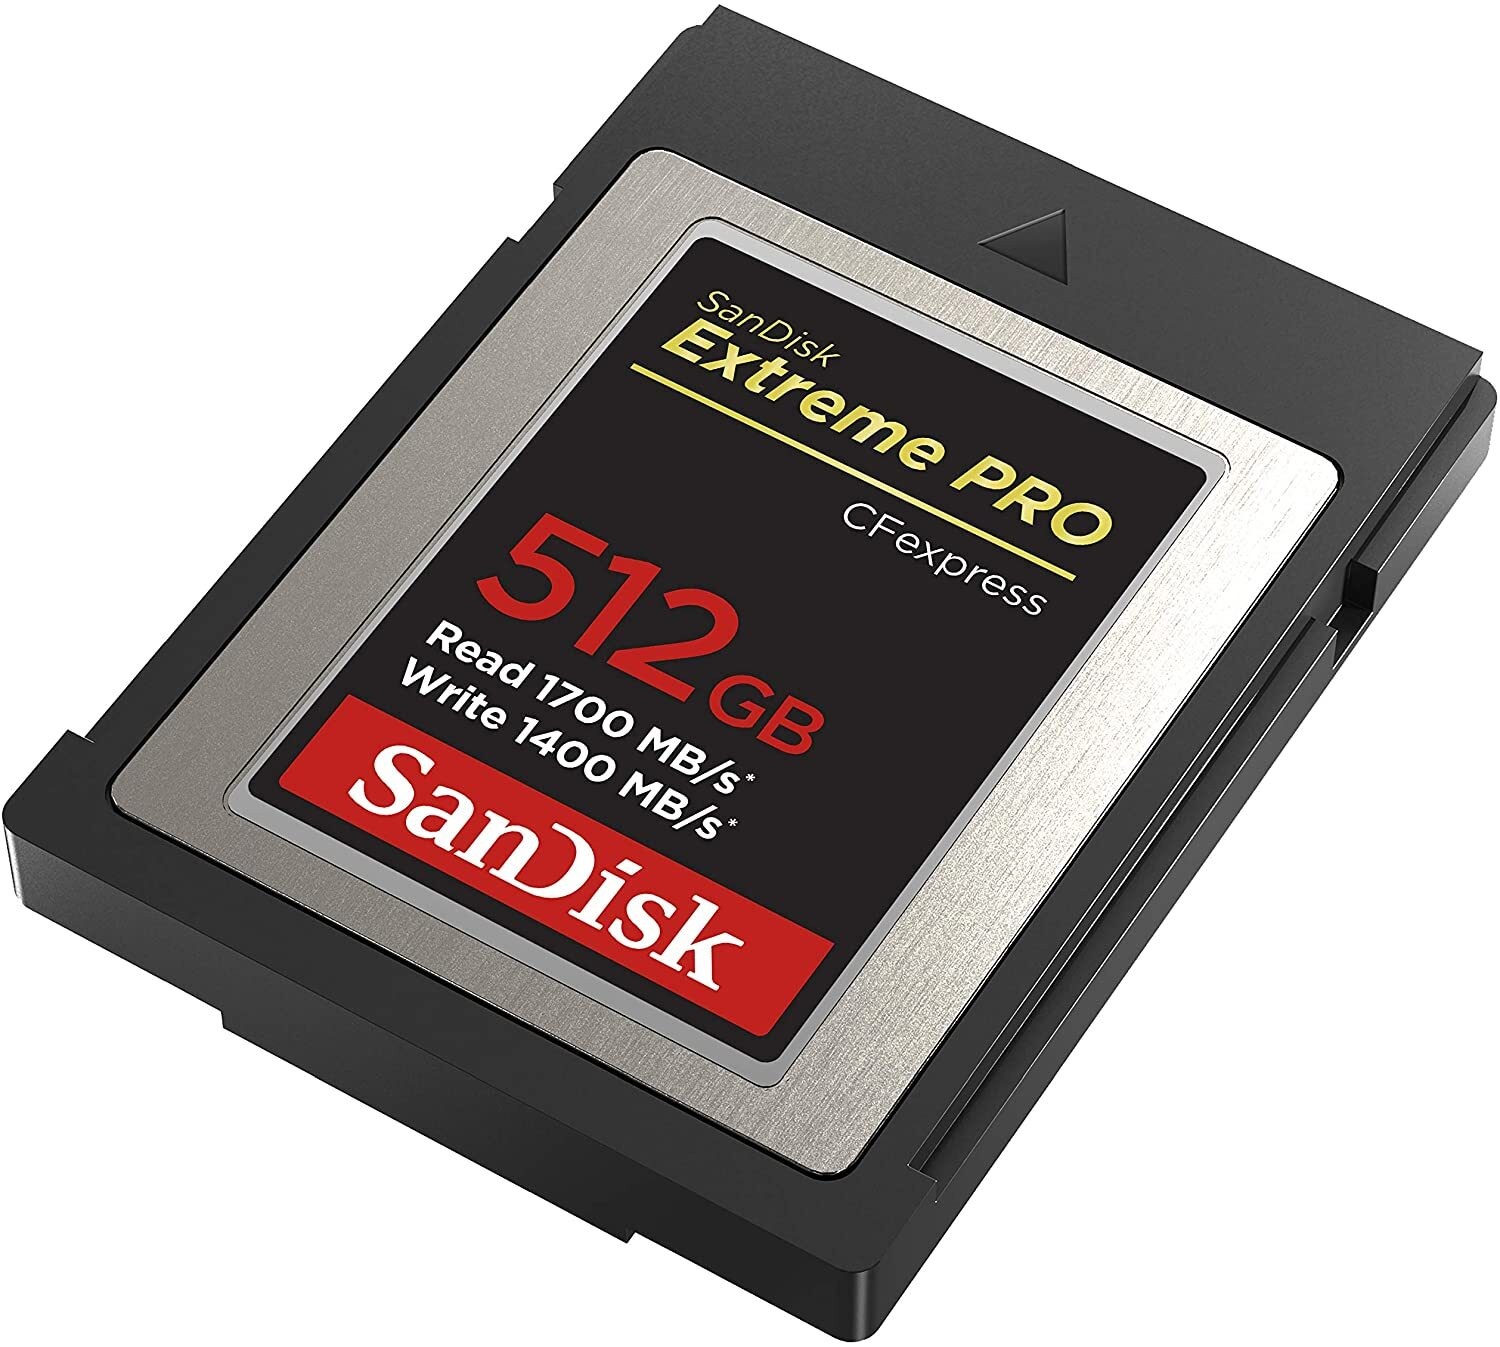 SanDisk Compact Flash Card 512 GB EXTREME PRO